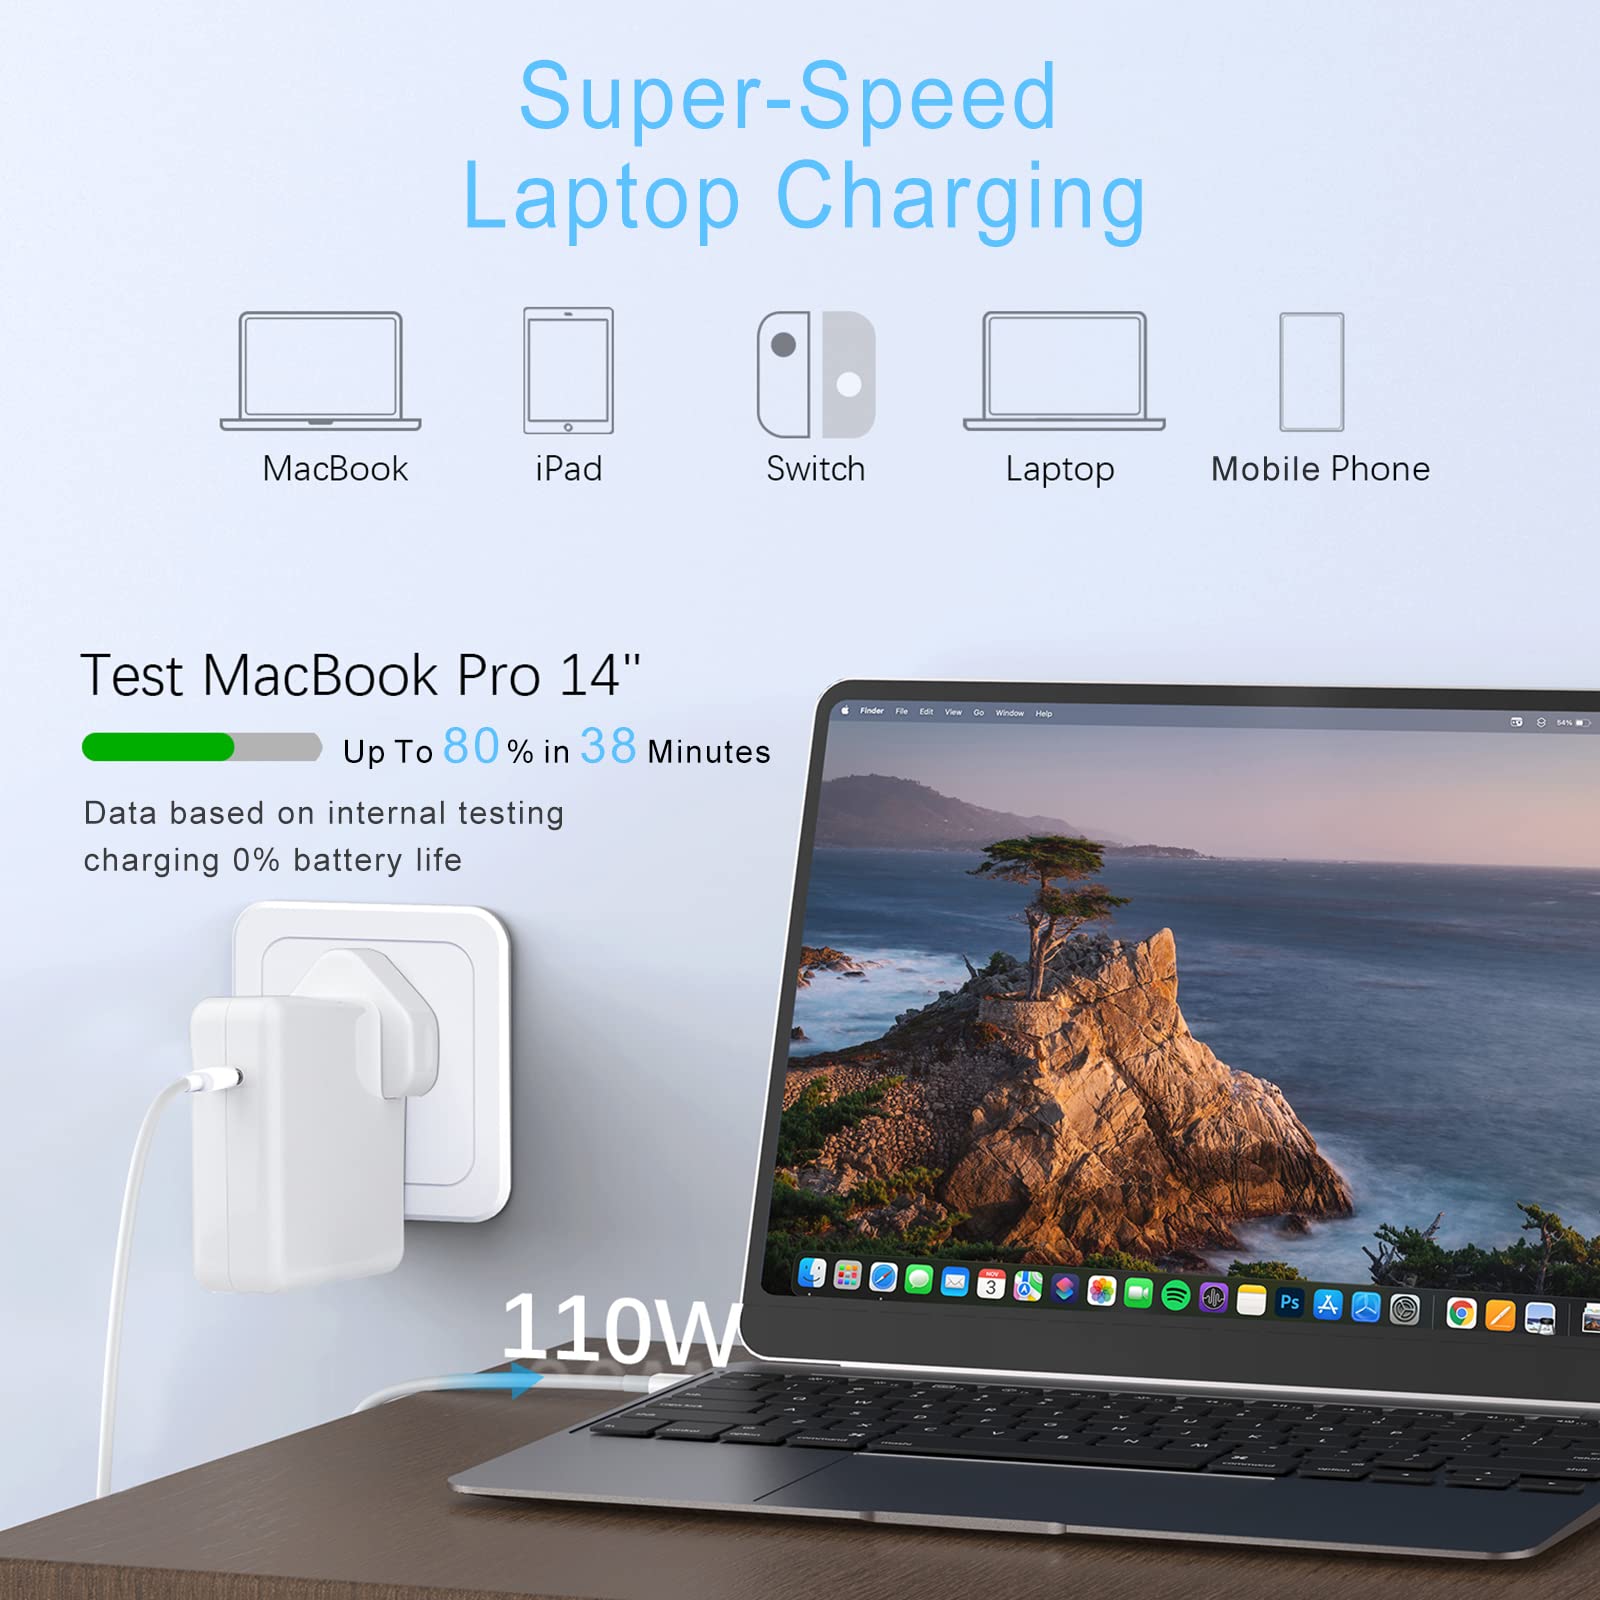 MReagle MacBook Pro Charger, 110W USB C Charger for Mac Pro, Macbook Air Charger Plug Adaptor with 1.8m C to C Cable, Compatible with MacBook Pro 16, 15, 14, 13, and More